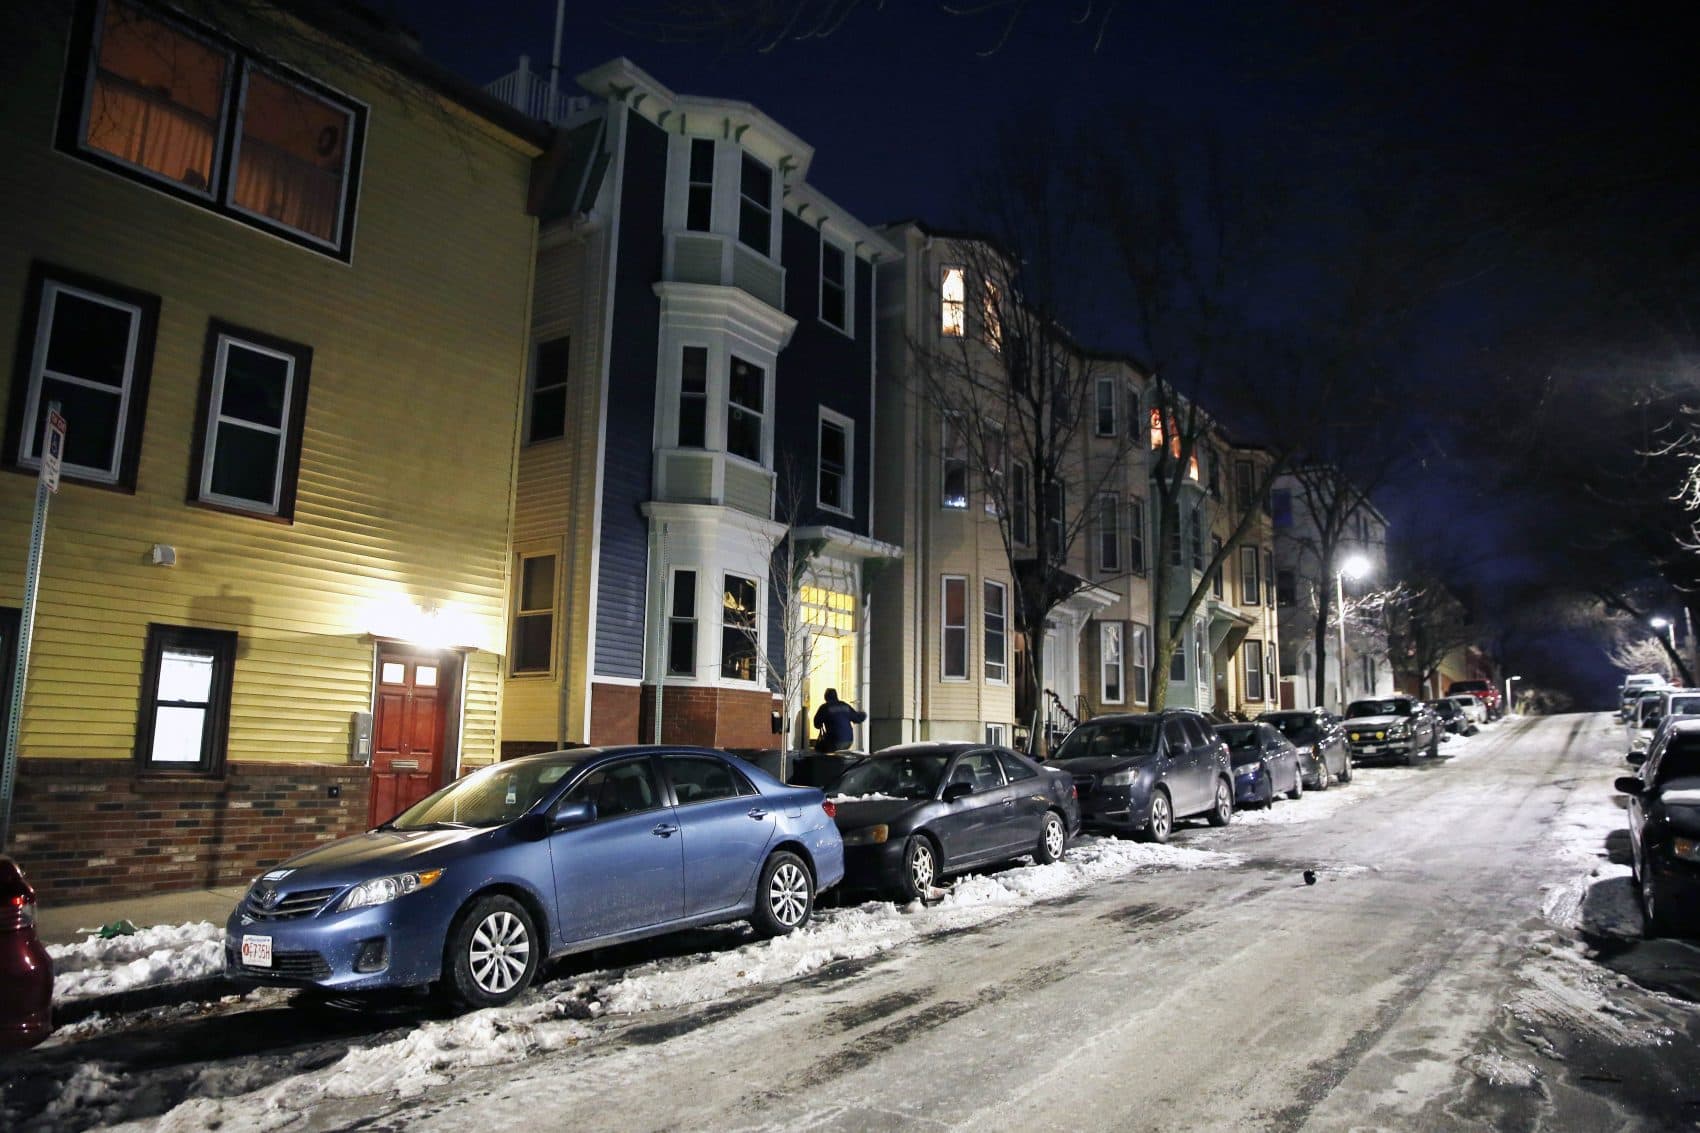 A person enters an apartment building on an icy street in the East Boston neighborhood of Boston as the temperature hovers in the single digits, Thursday, Dec. 28, 2017. The National Weather Service said there's the potential for record-breaking cold this week in New England. (AP Photo/Michael Dwyer)